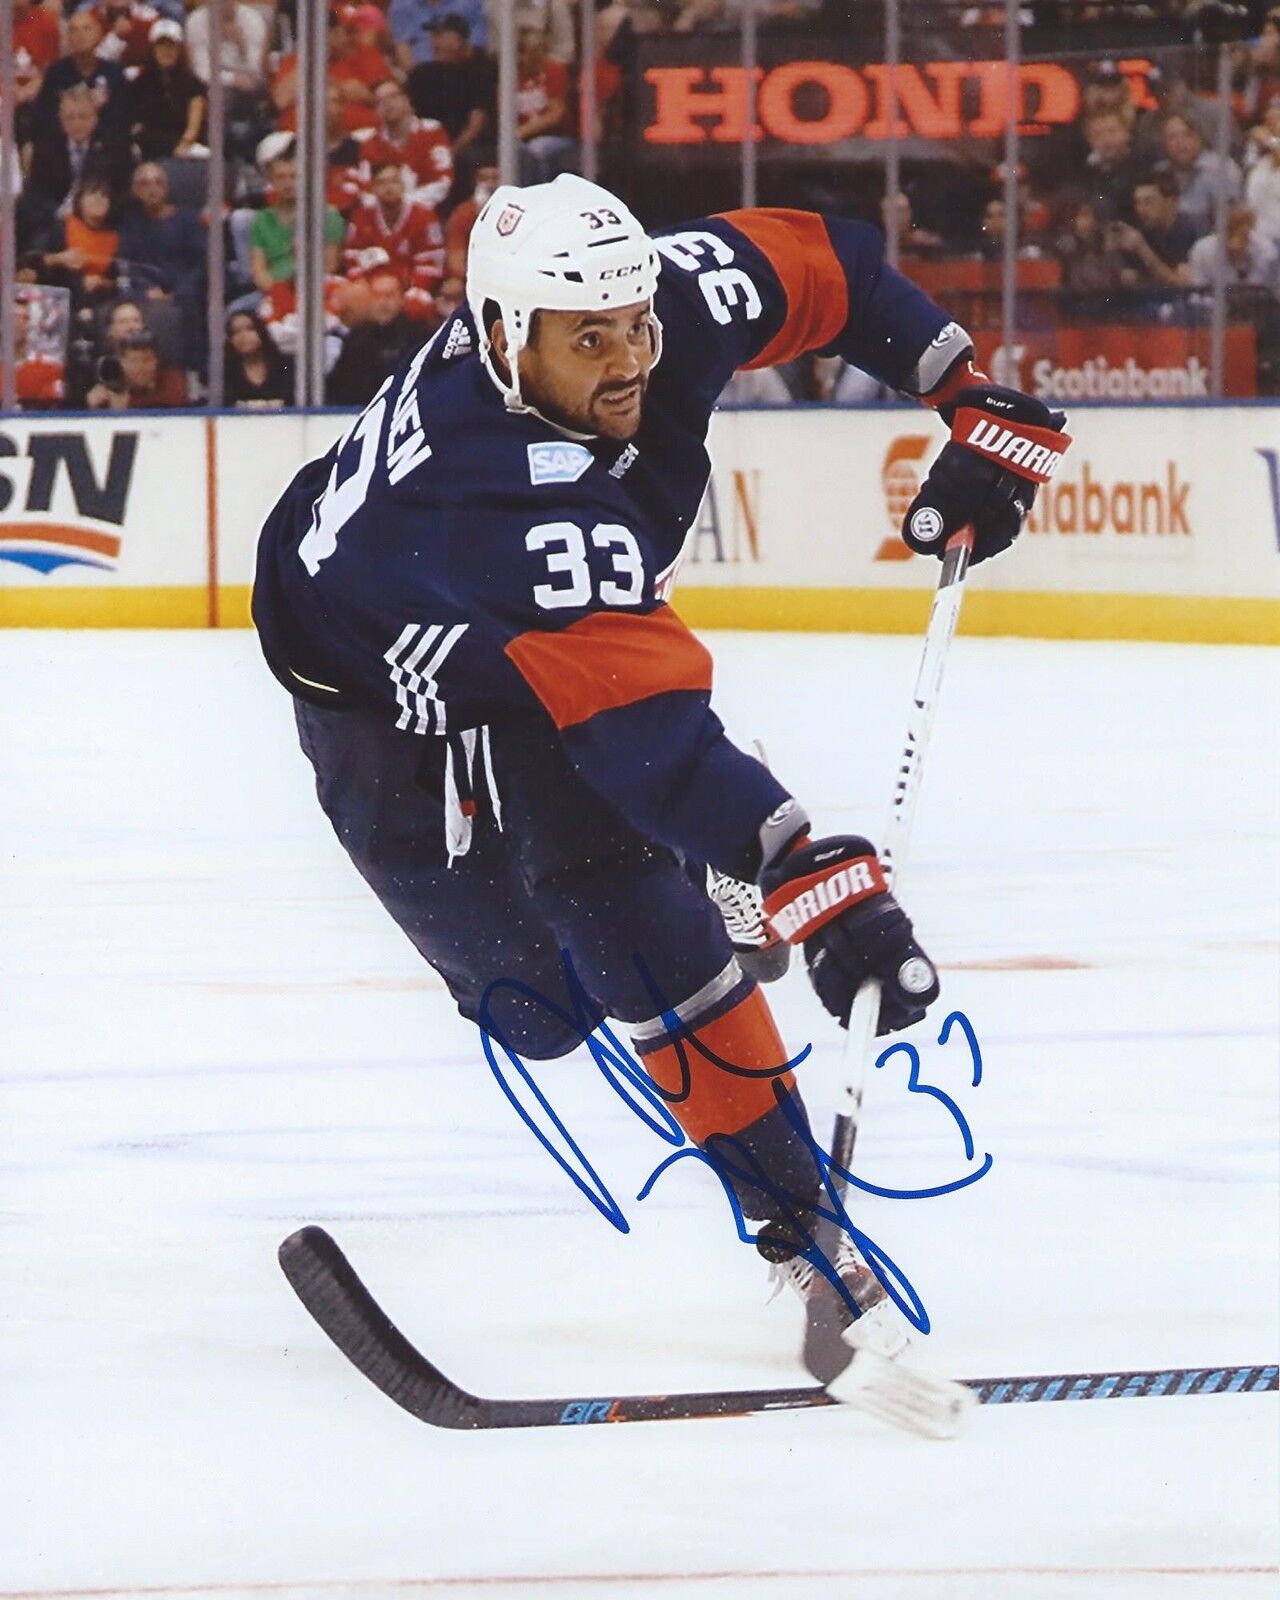 Dustin Byfuglien Signed 8x10 Photo Poster painting Team USA World Cup Of Hockey Autographed COA